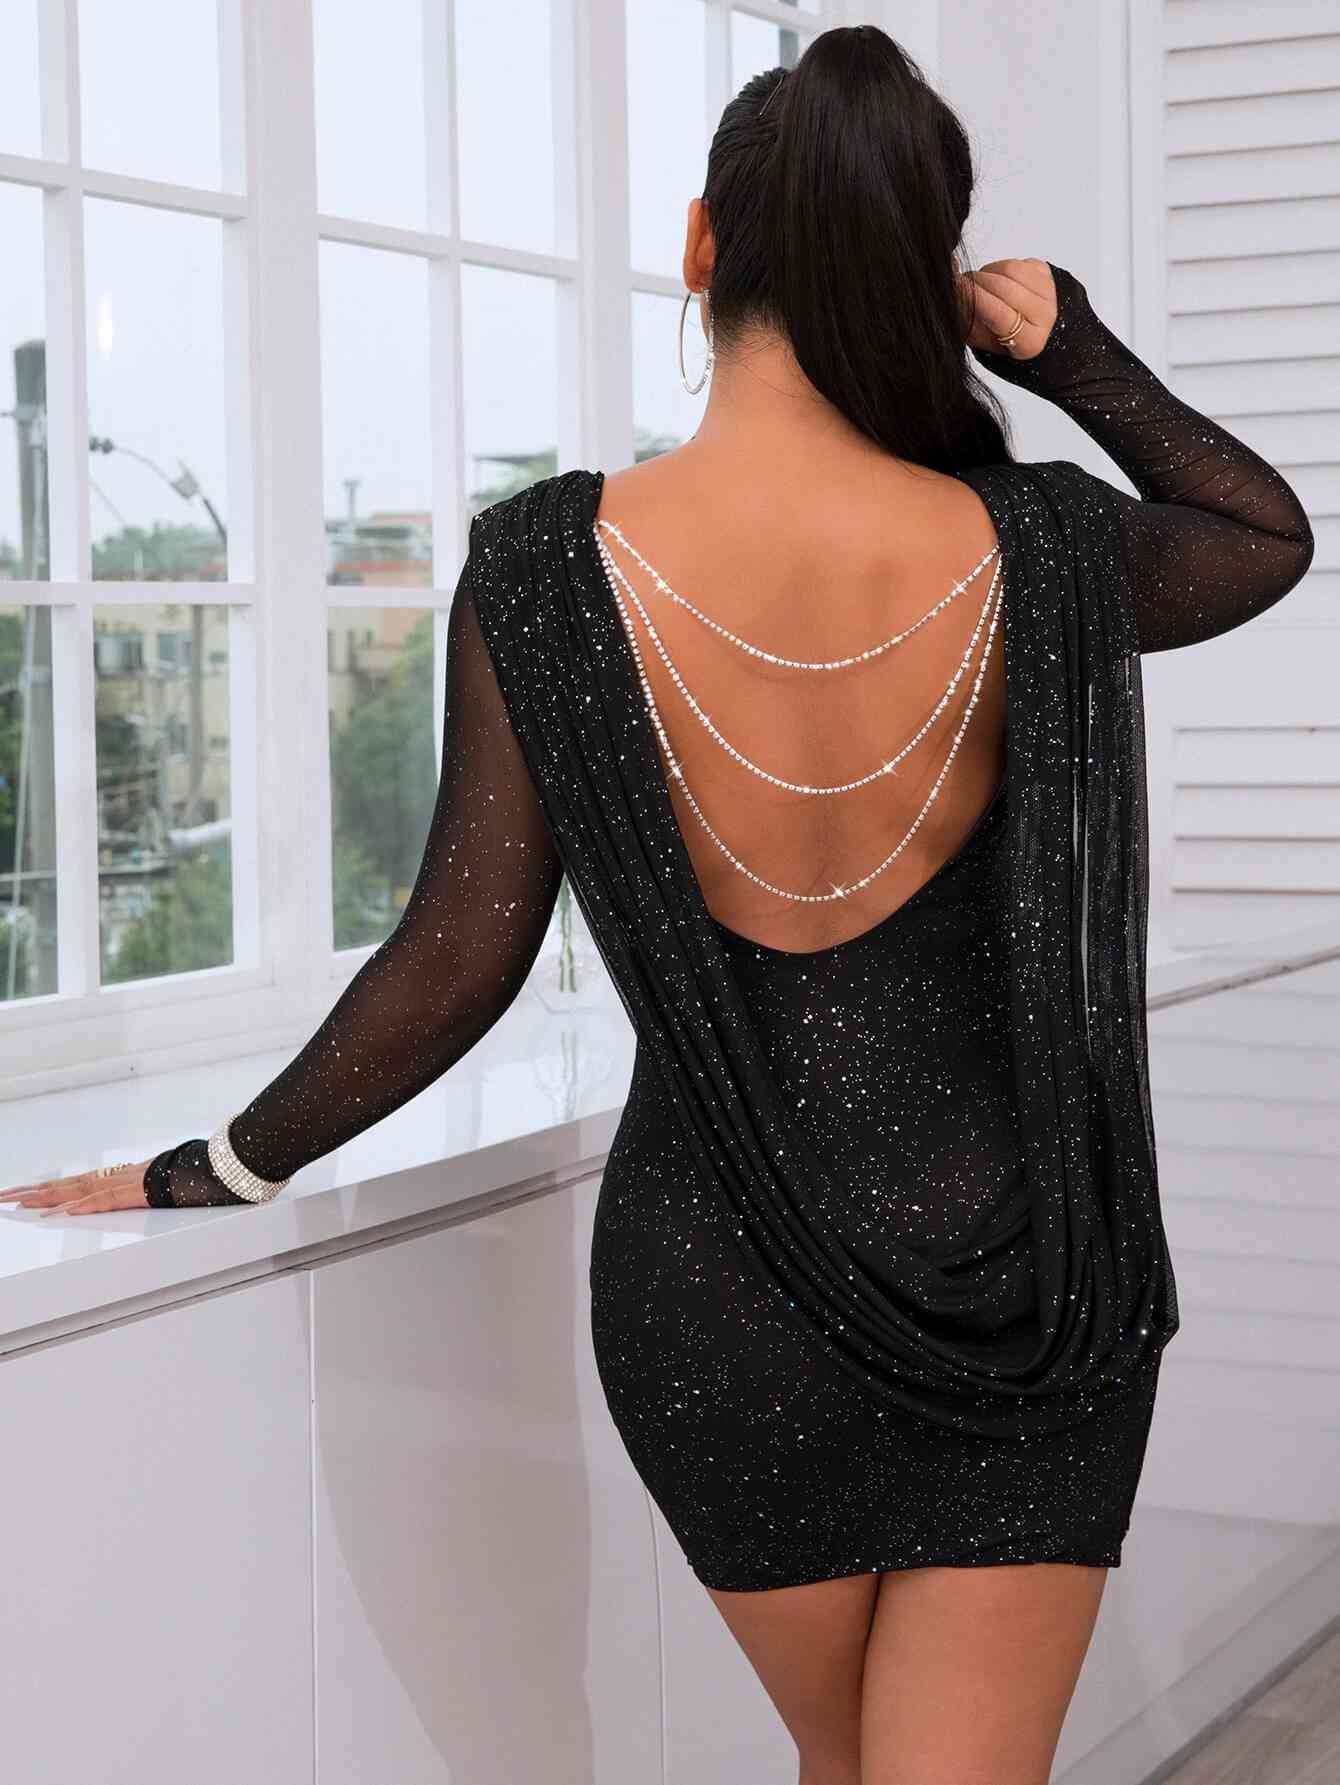 the back of a woman in a black dress